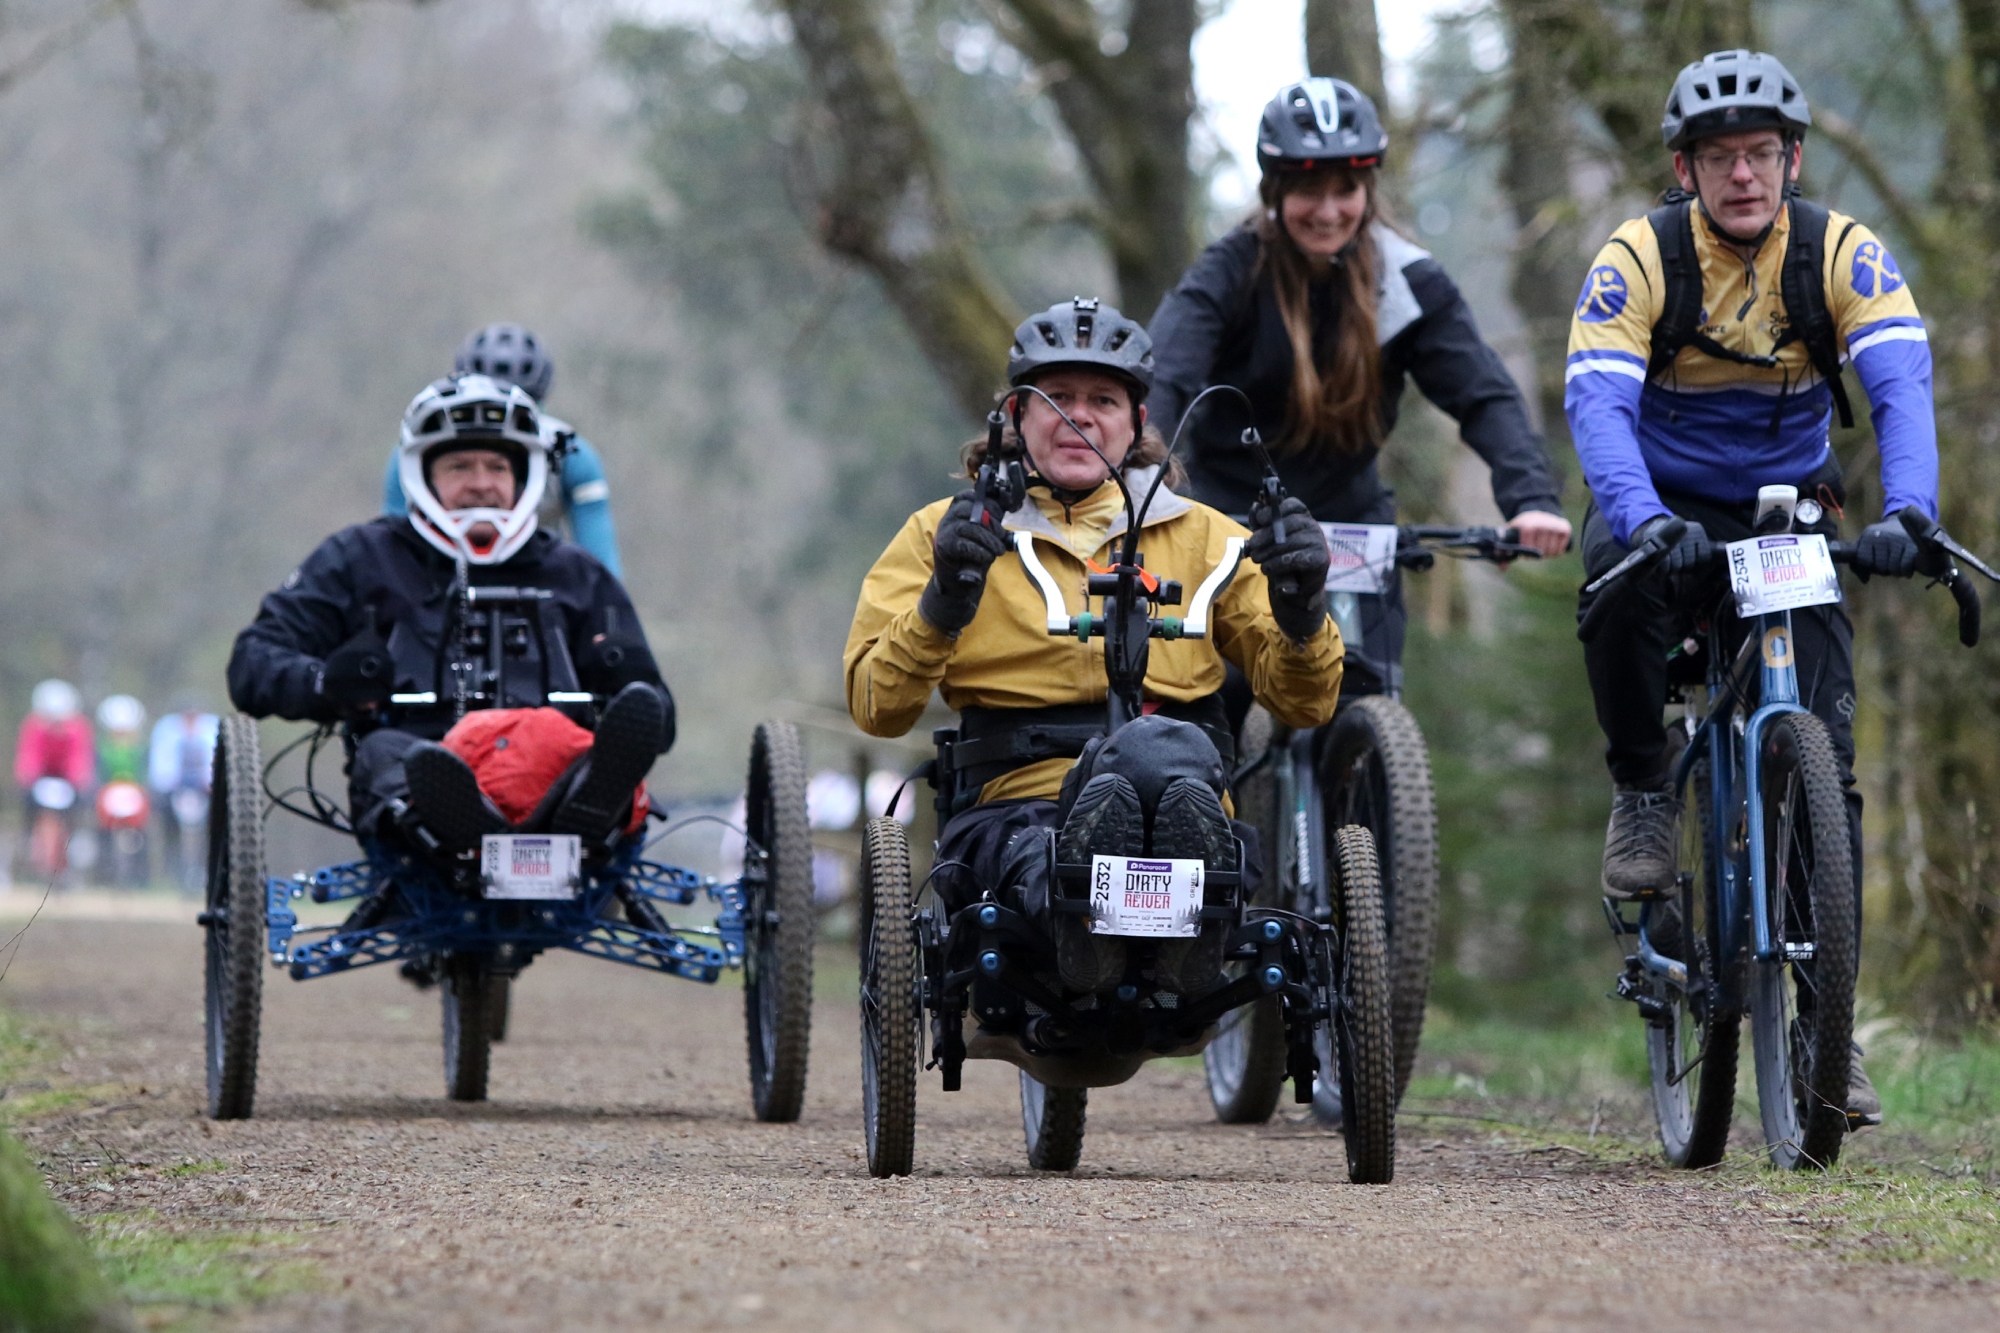 Hand cyclists taking part in the Dirty Reiver gravel race